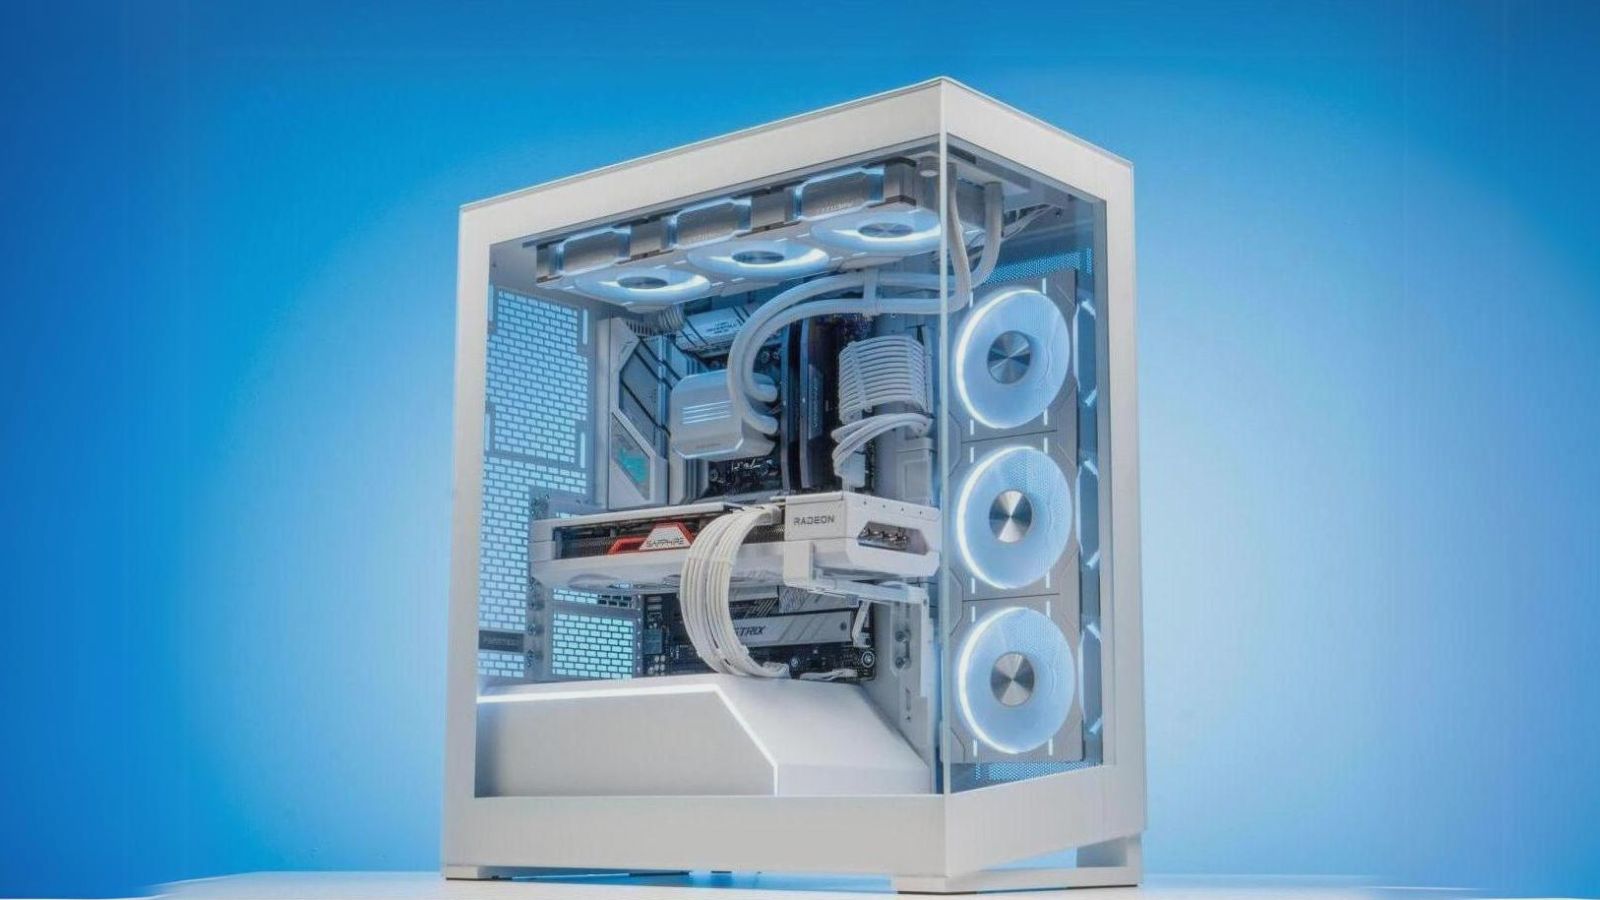 Everything You Need to Create the Perfect White Gaming PC!